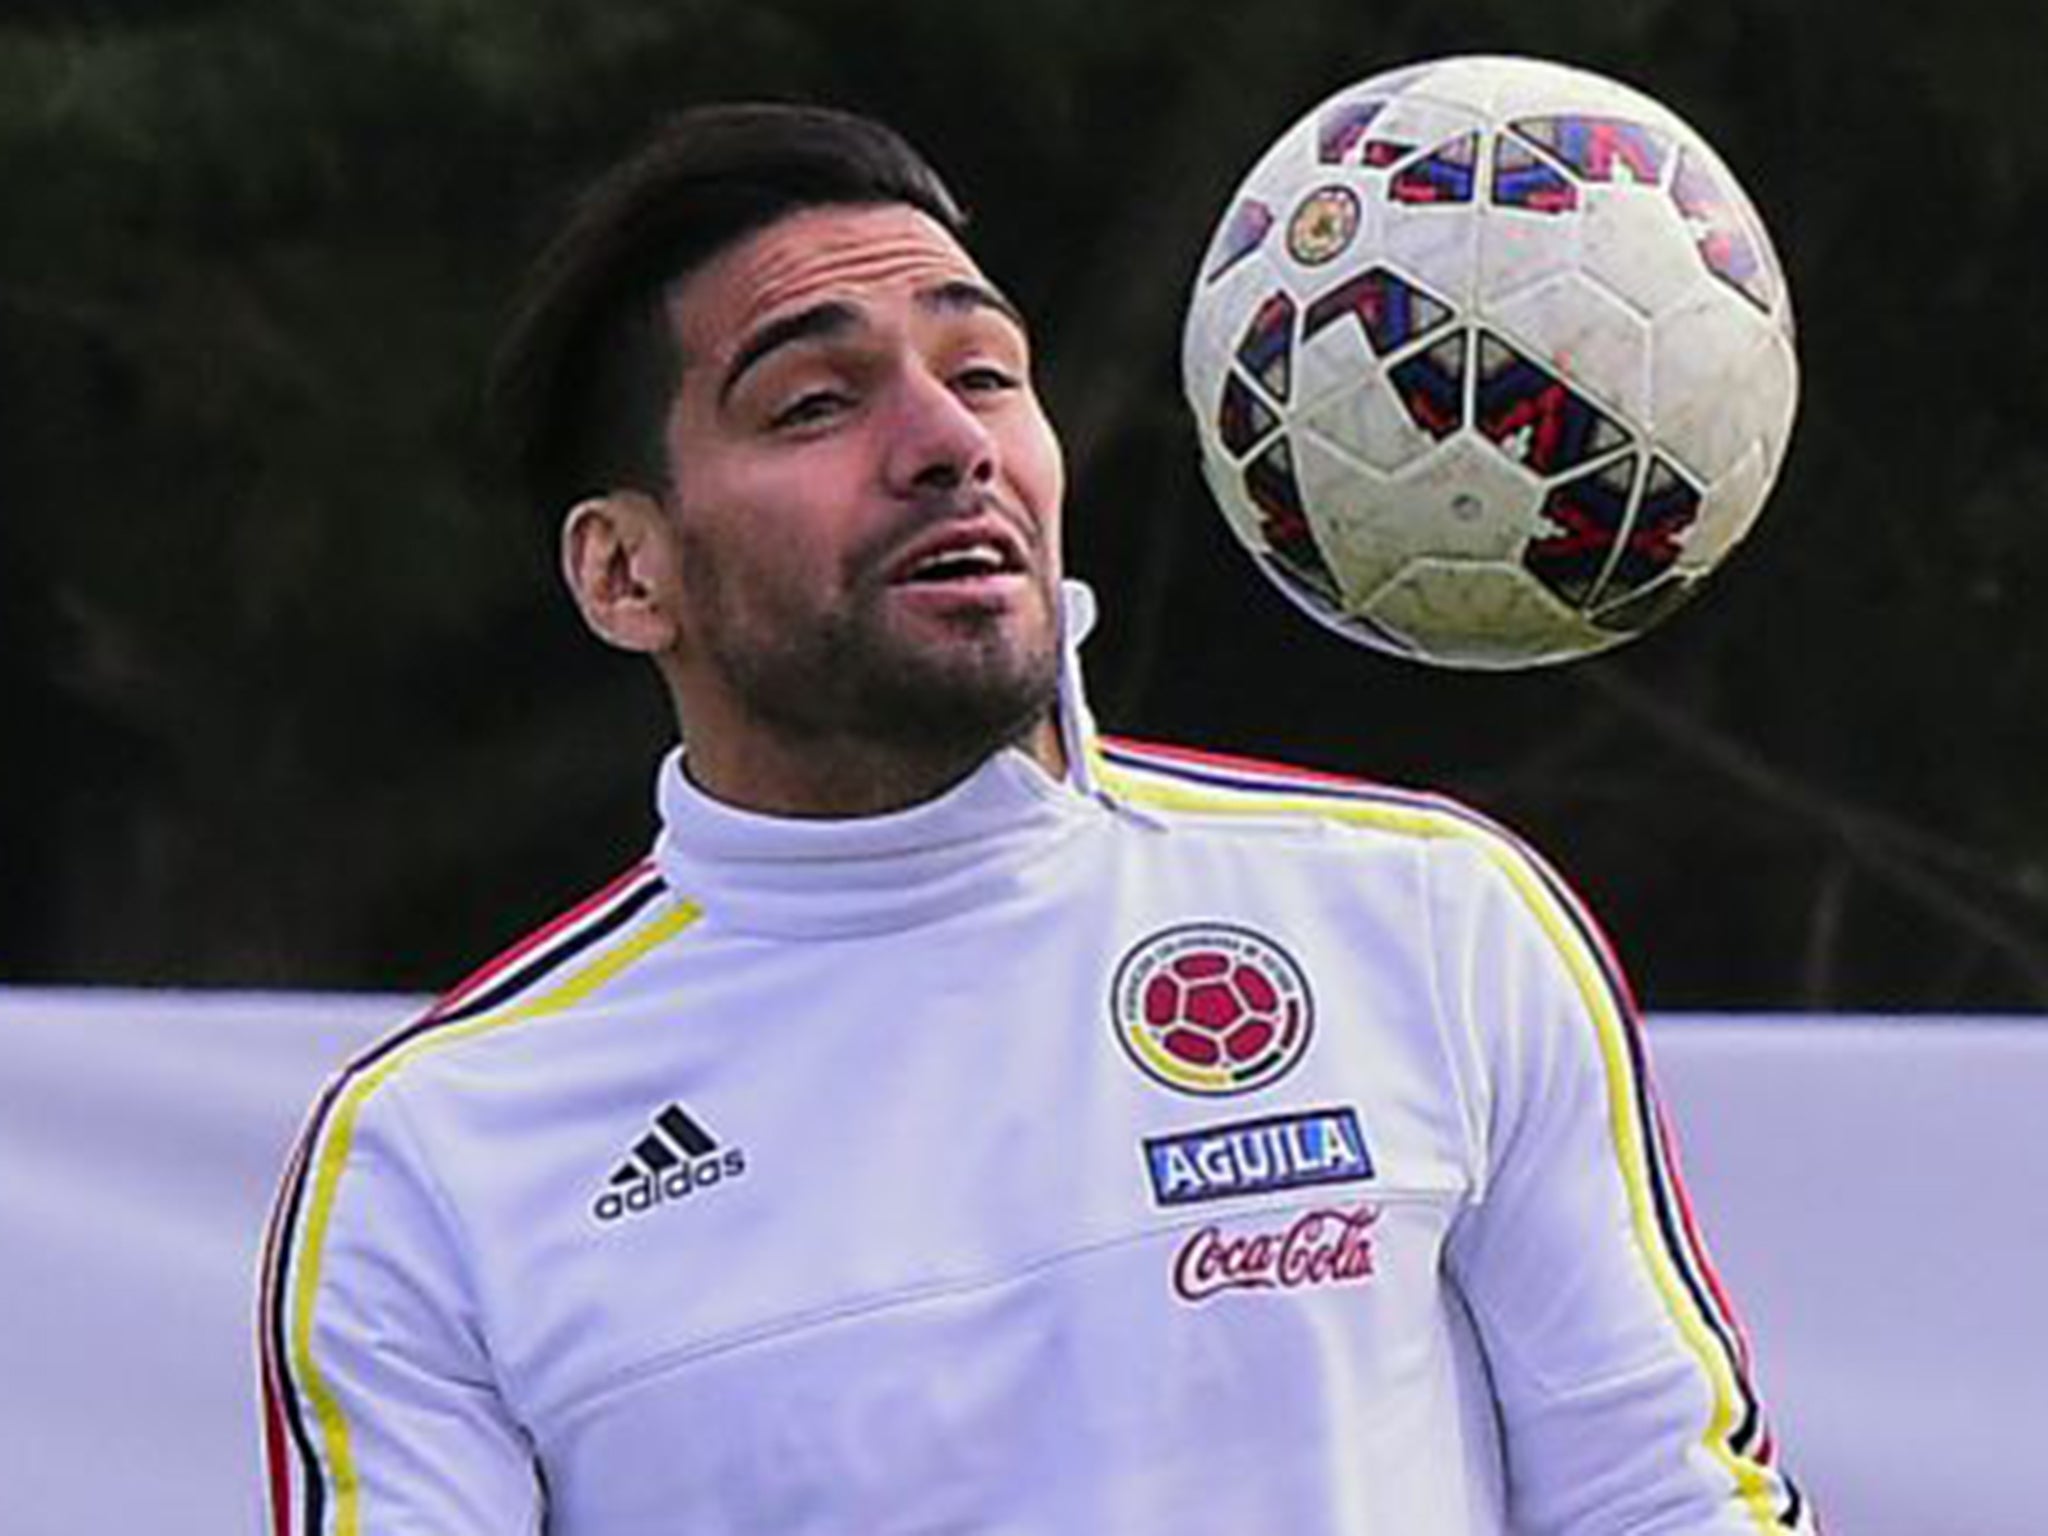 Colombia coach Jose Pekerman has kept faith with his out-of-form striker Radamel Falcao until now